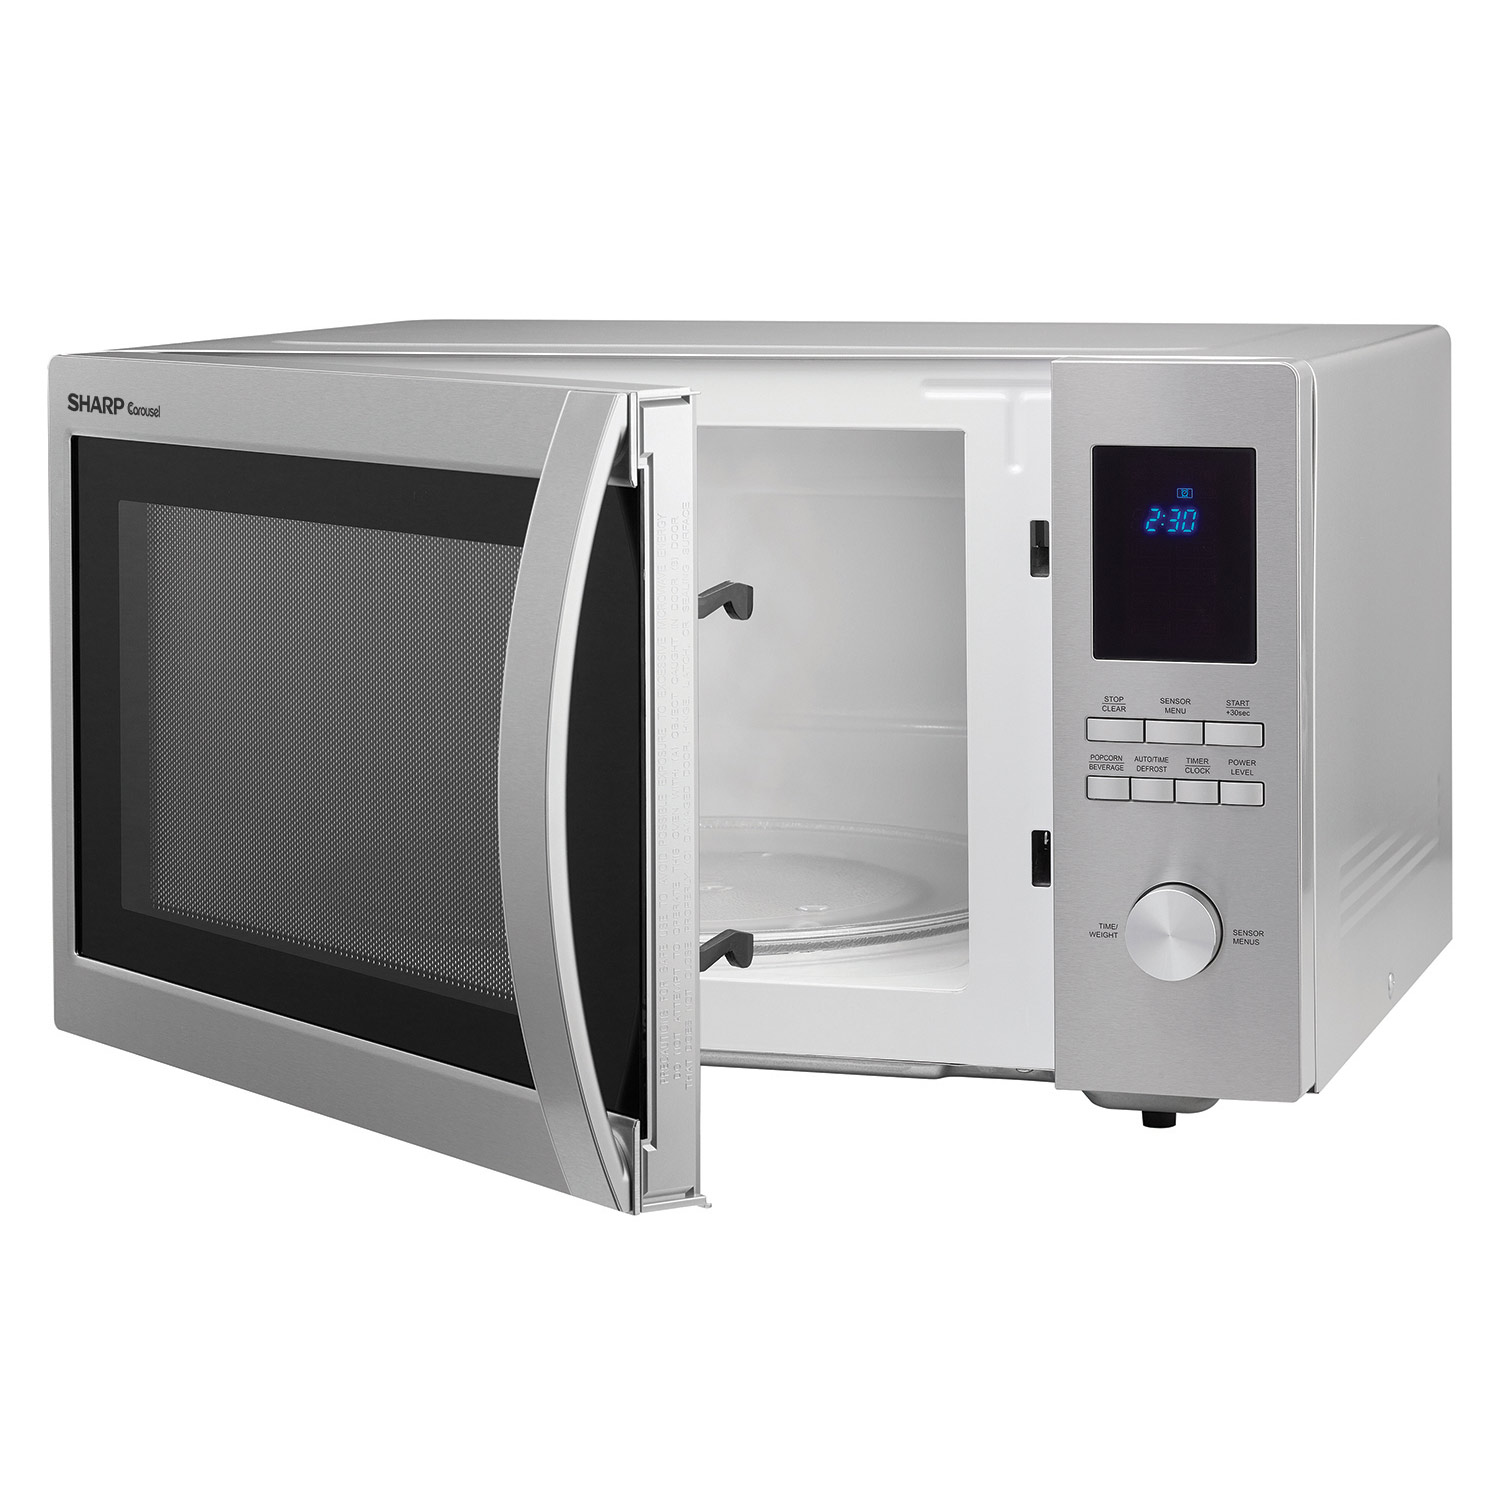 1.5 cu. ft. 1100W Stainless Steel Sharp Over-the-Counter Carousel Microwave  Oven (R1214TY)